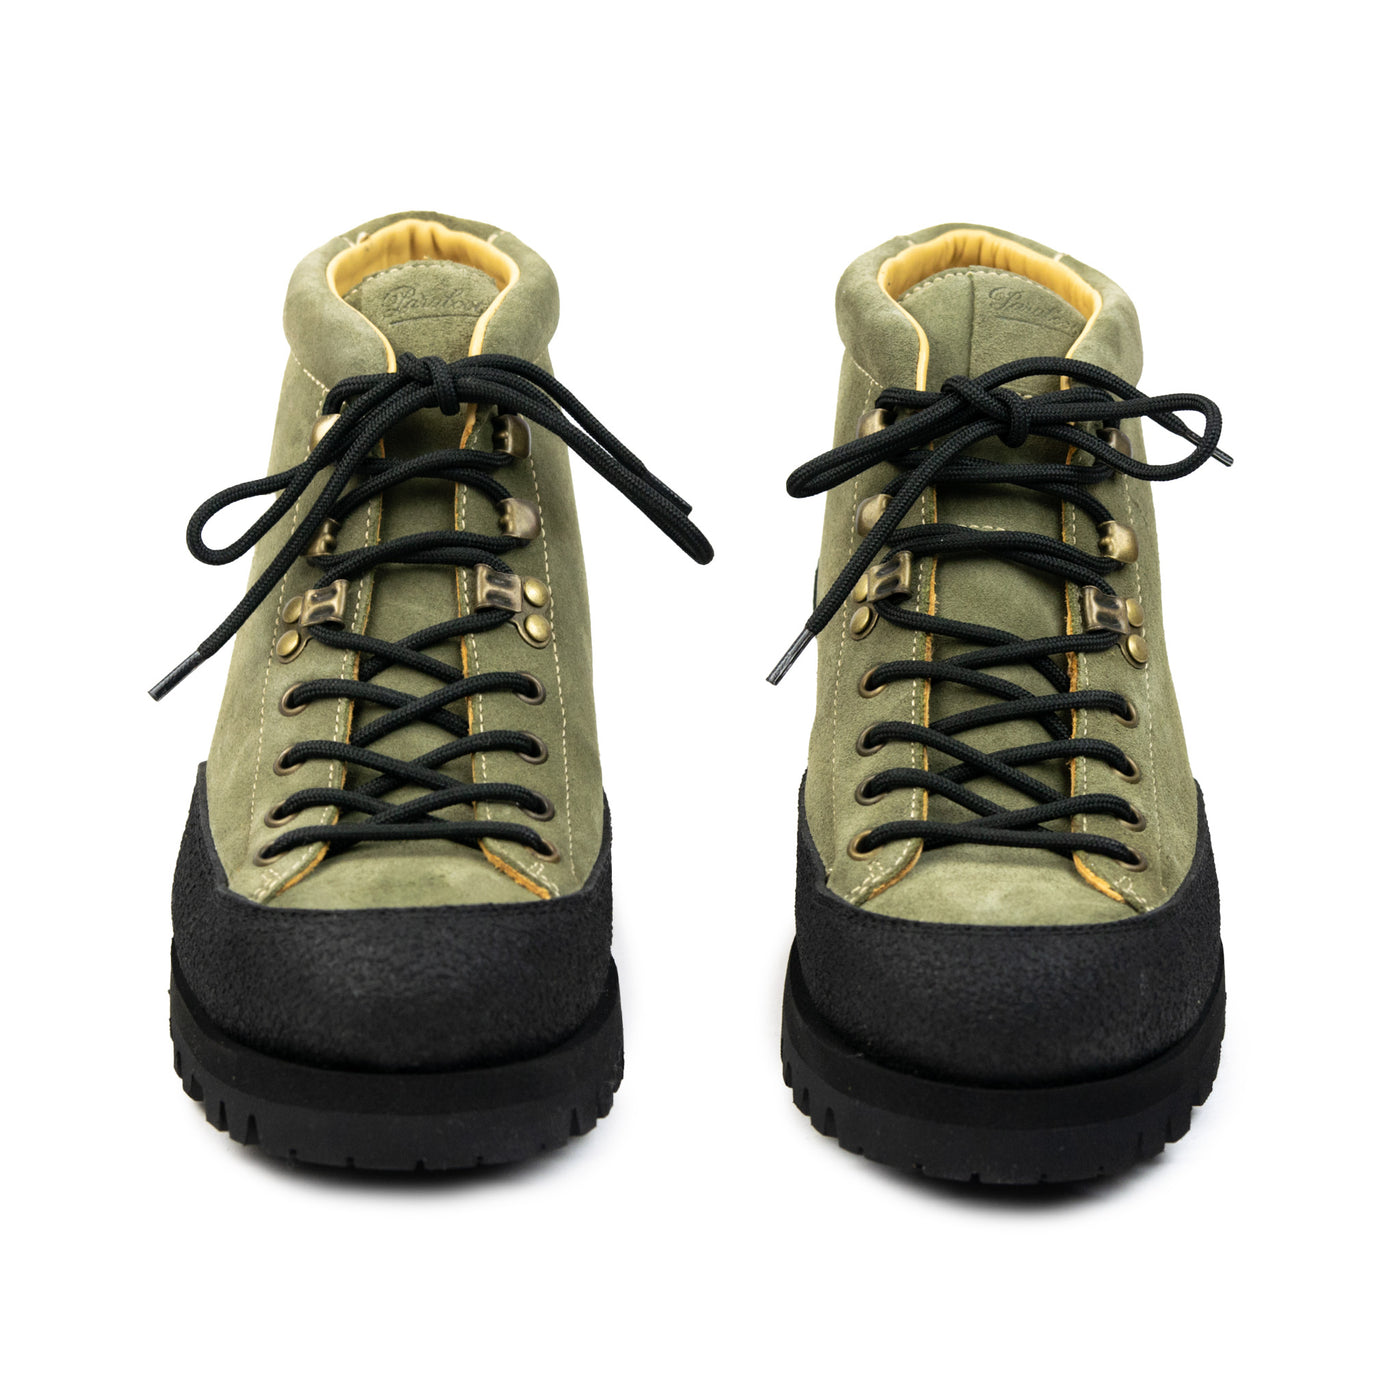 Paraboot Yosemite / Jannu Int 8 Boot Noire Vel Olive Front 